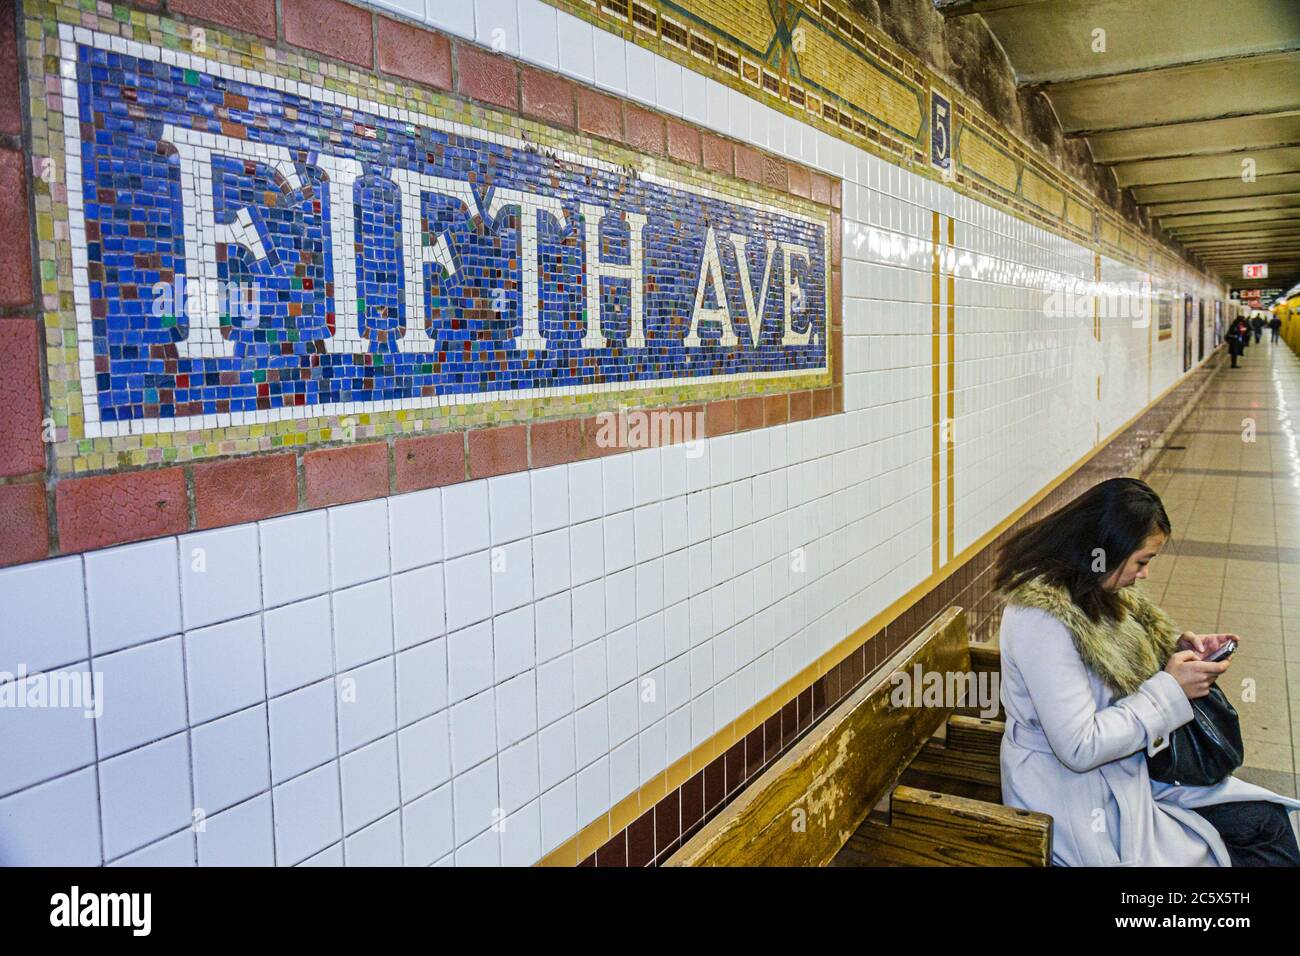 New York,New York City,NYC,Manhattan,Midtown,MTA New York Subway system,5th Fifth Avenue Station,N R Q highway Route,waiting platform,name tablet,mosa Stock Photo